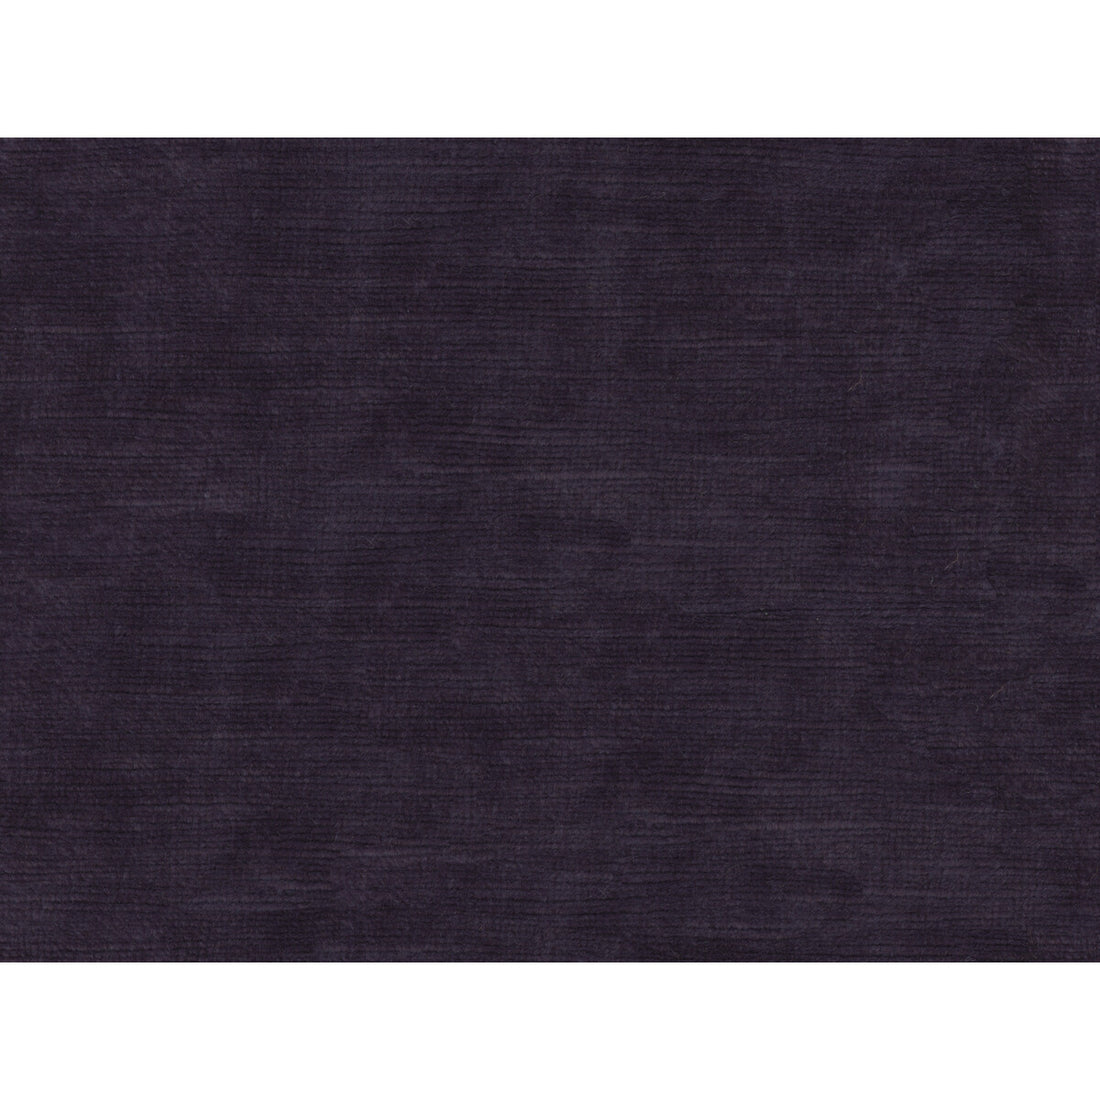 Fulham Linen V fabric in grape color - pattern 2016133.1010.0 - by Lee Jofa